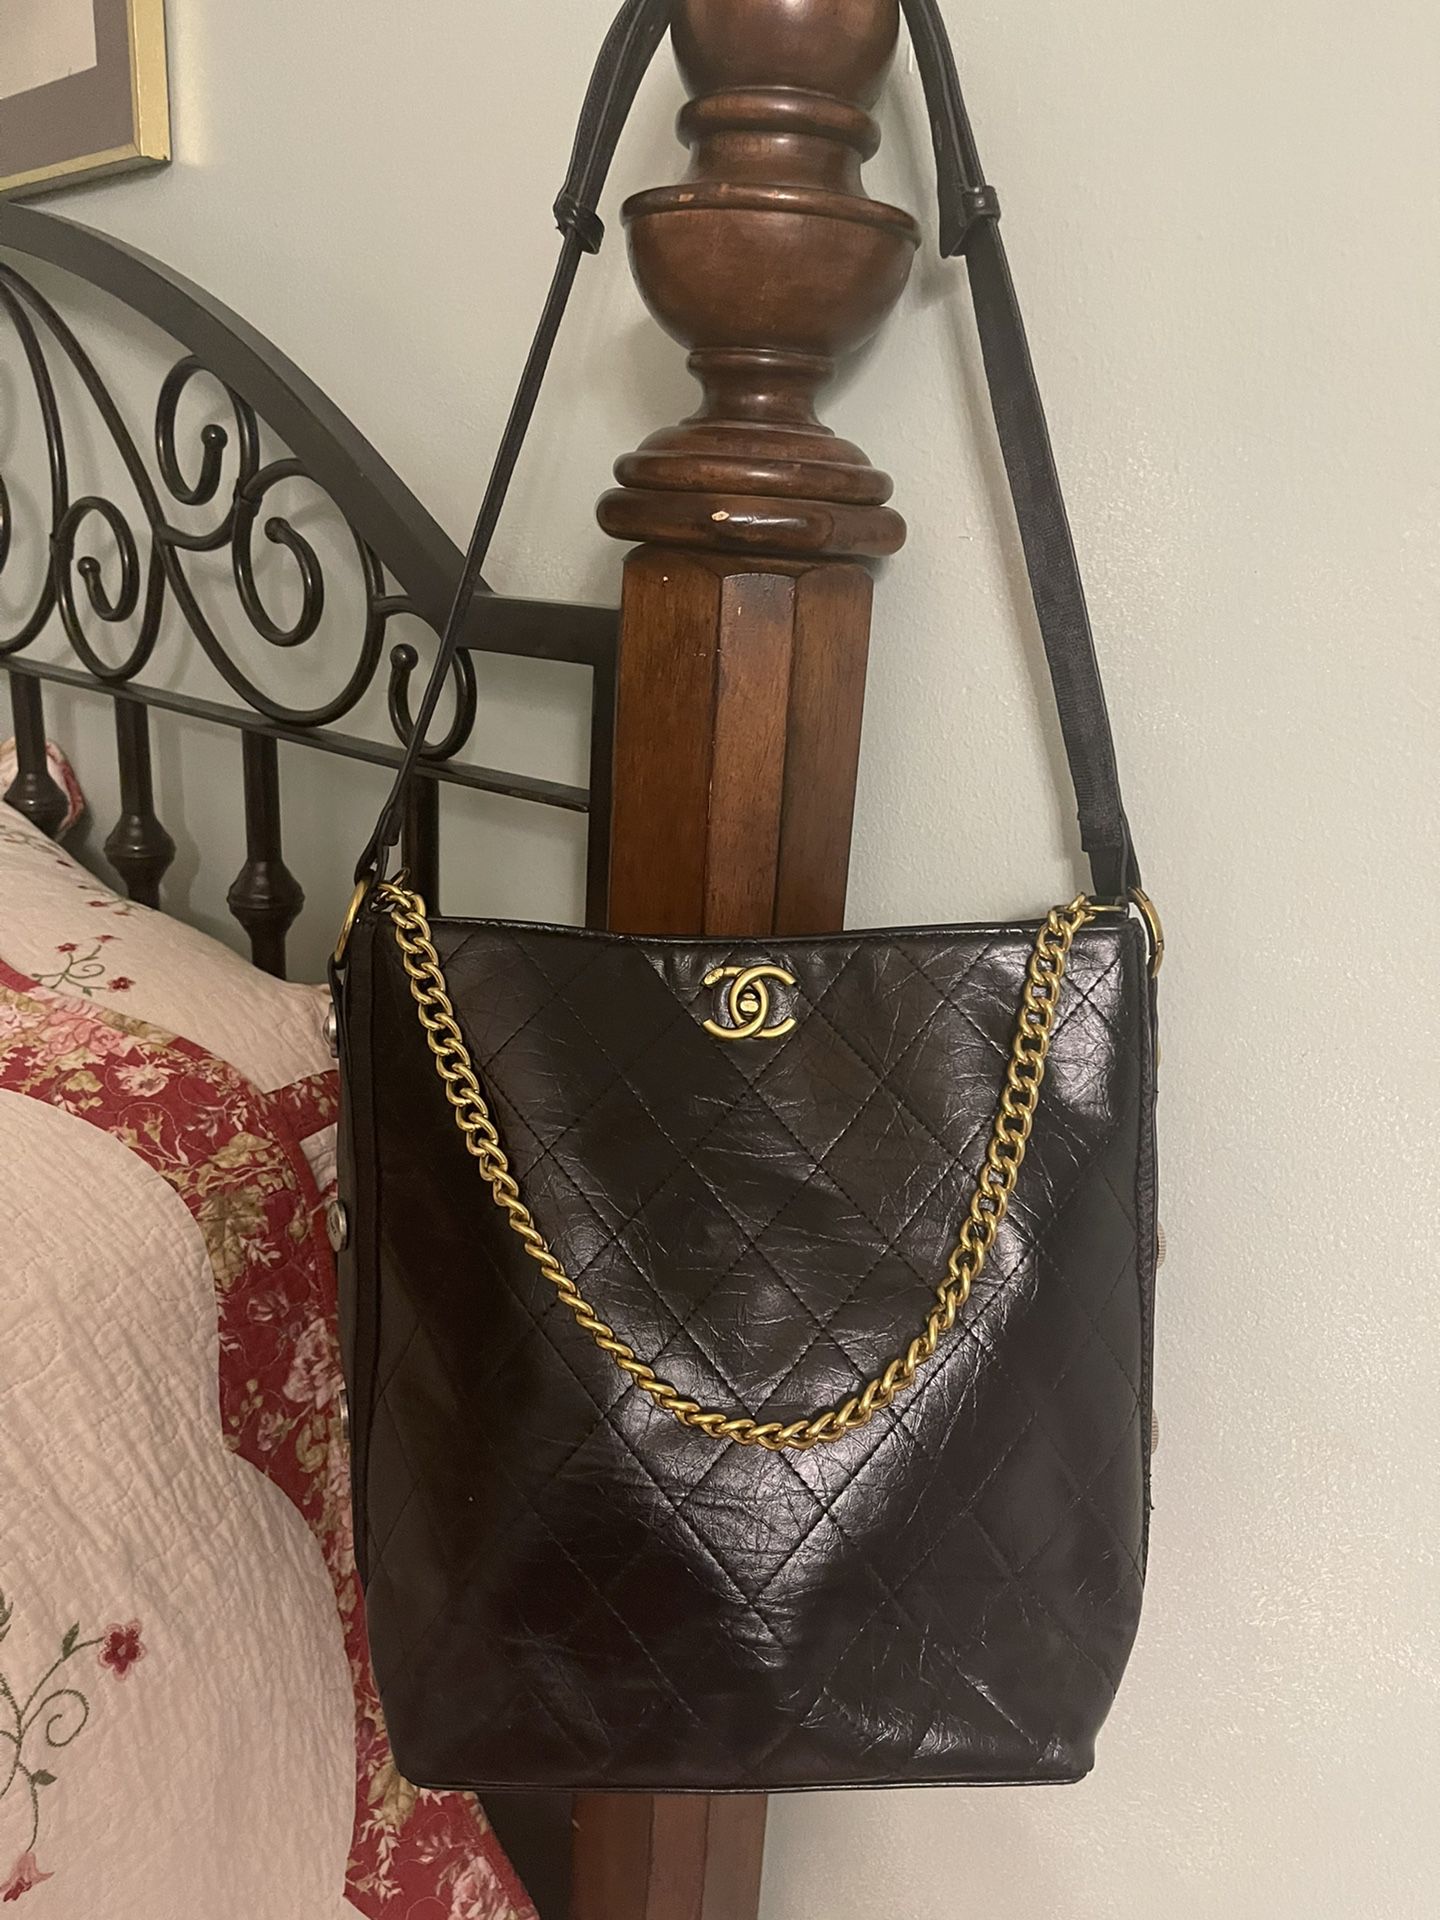 One of a Kind Vintage Black Chanel Purse for Sale in Thonotosassa